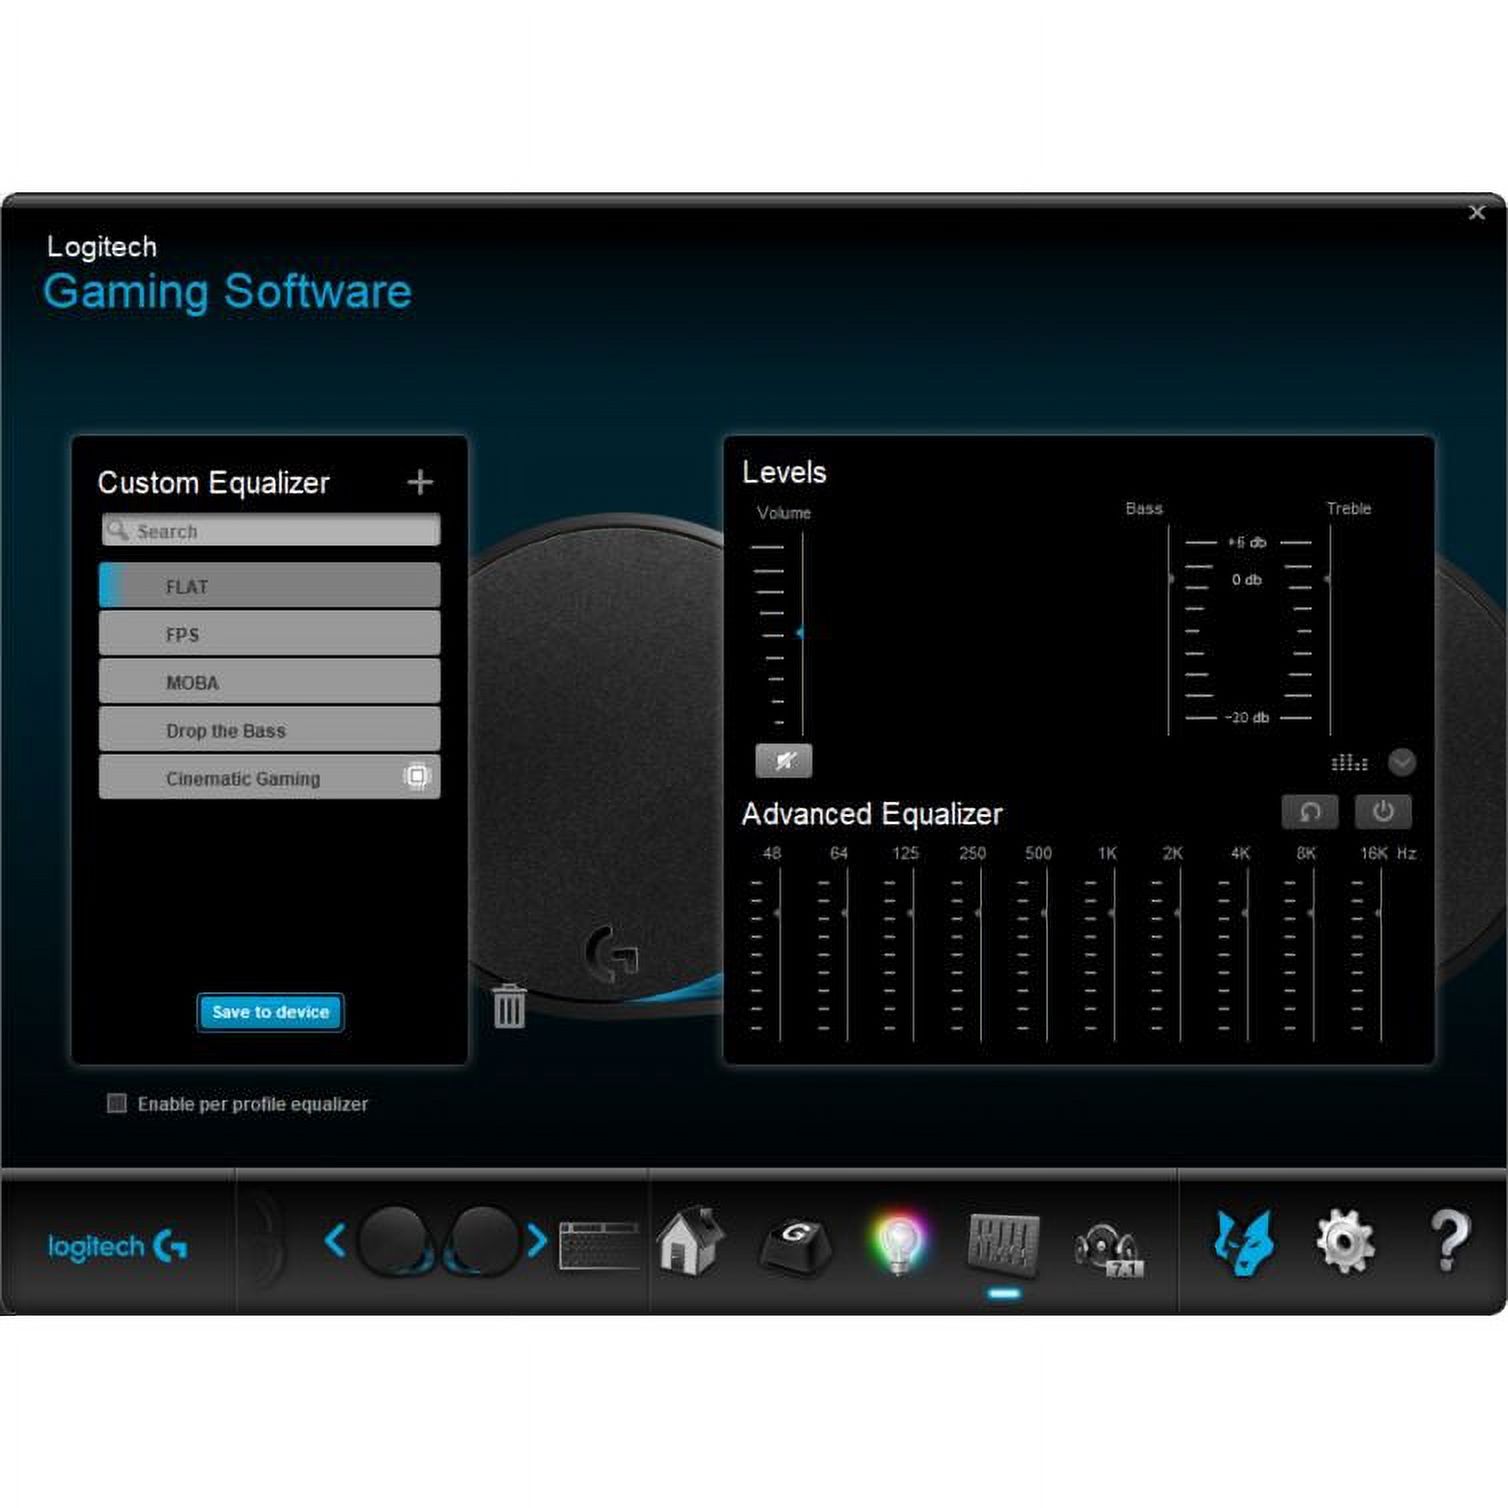 Logitech G560 PC Gaming Speaker System with 7.1 DTS:X Ultra Surround Sound, Game based LIGHTSYNC RGB, Two Speakers and Subwoofer, Immersive Gaming Experience - Black - image 3 of 21